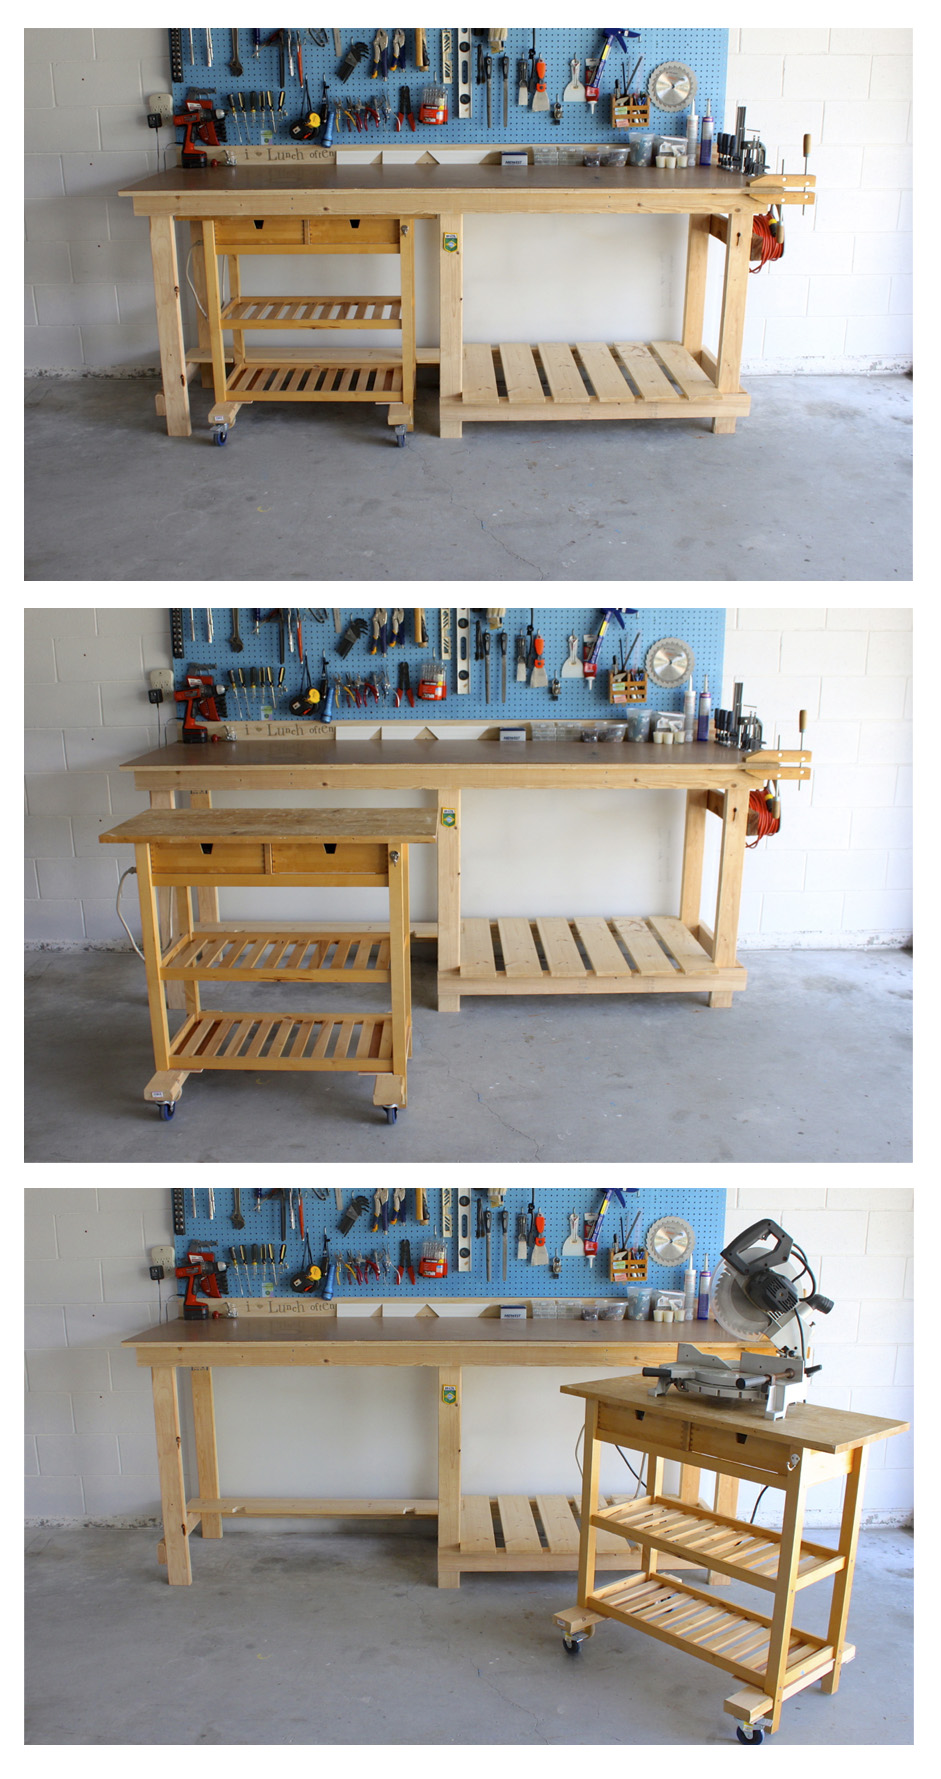 Here we have a garage workbench designed and built to fit around an 